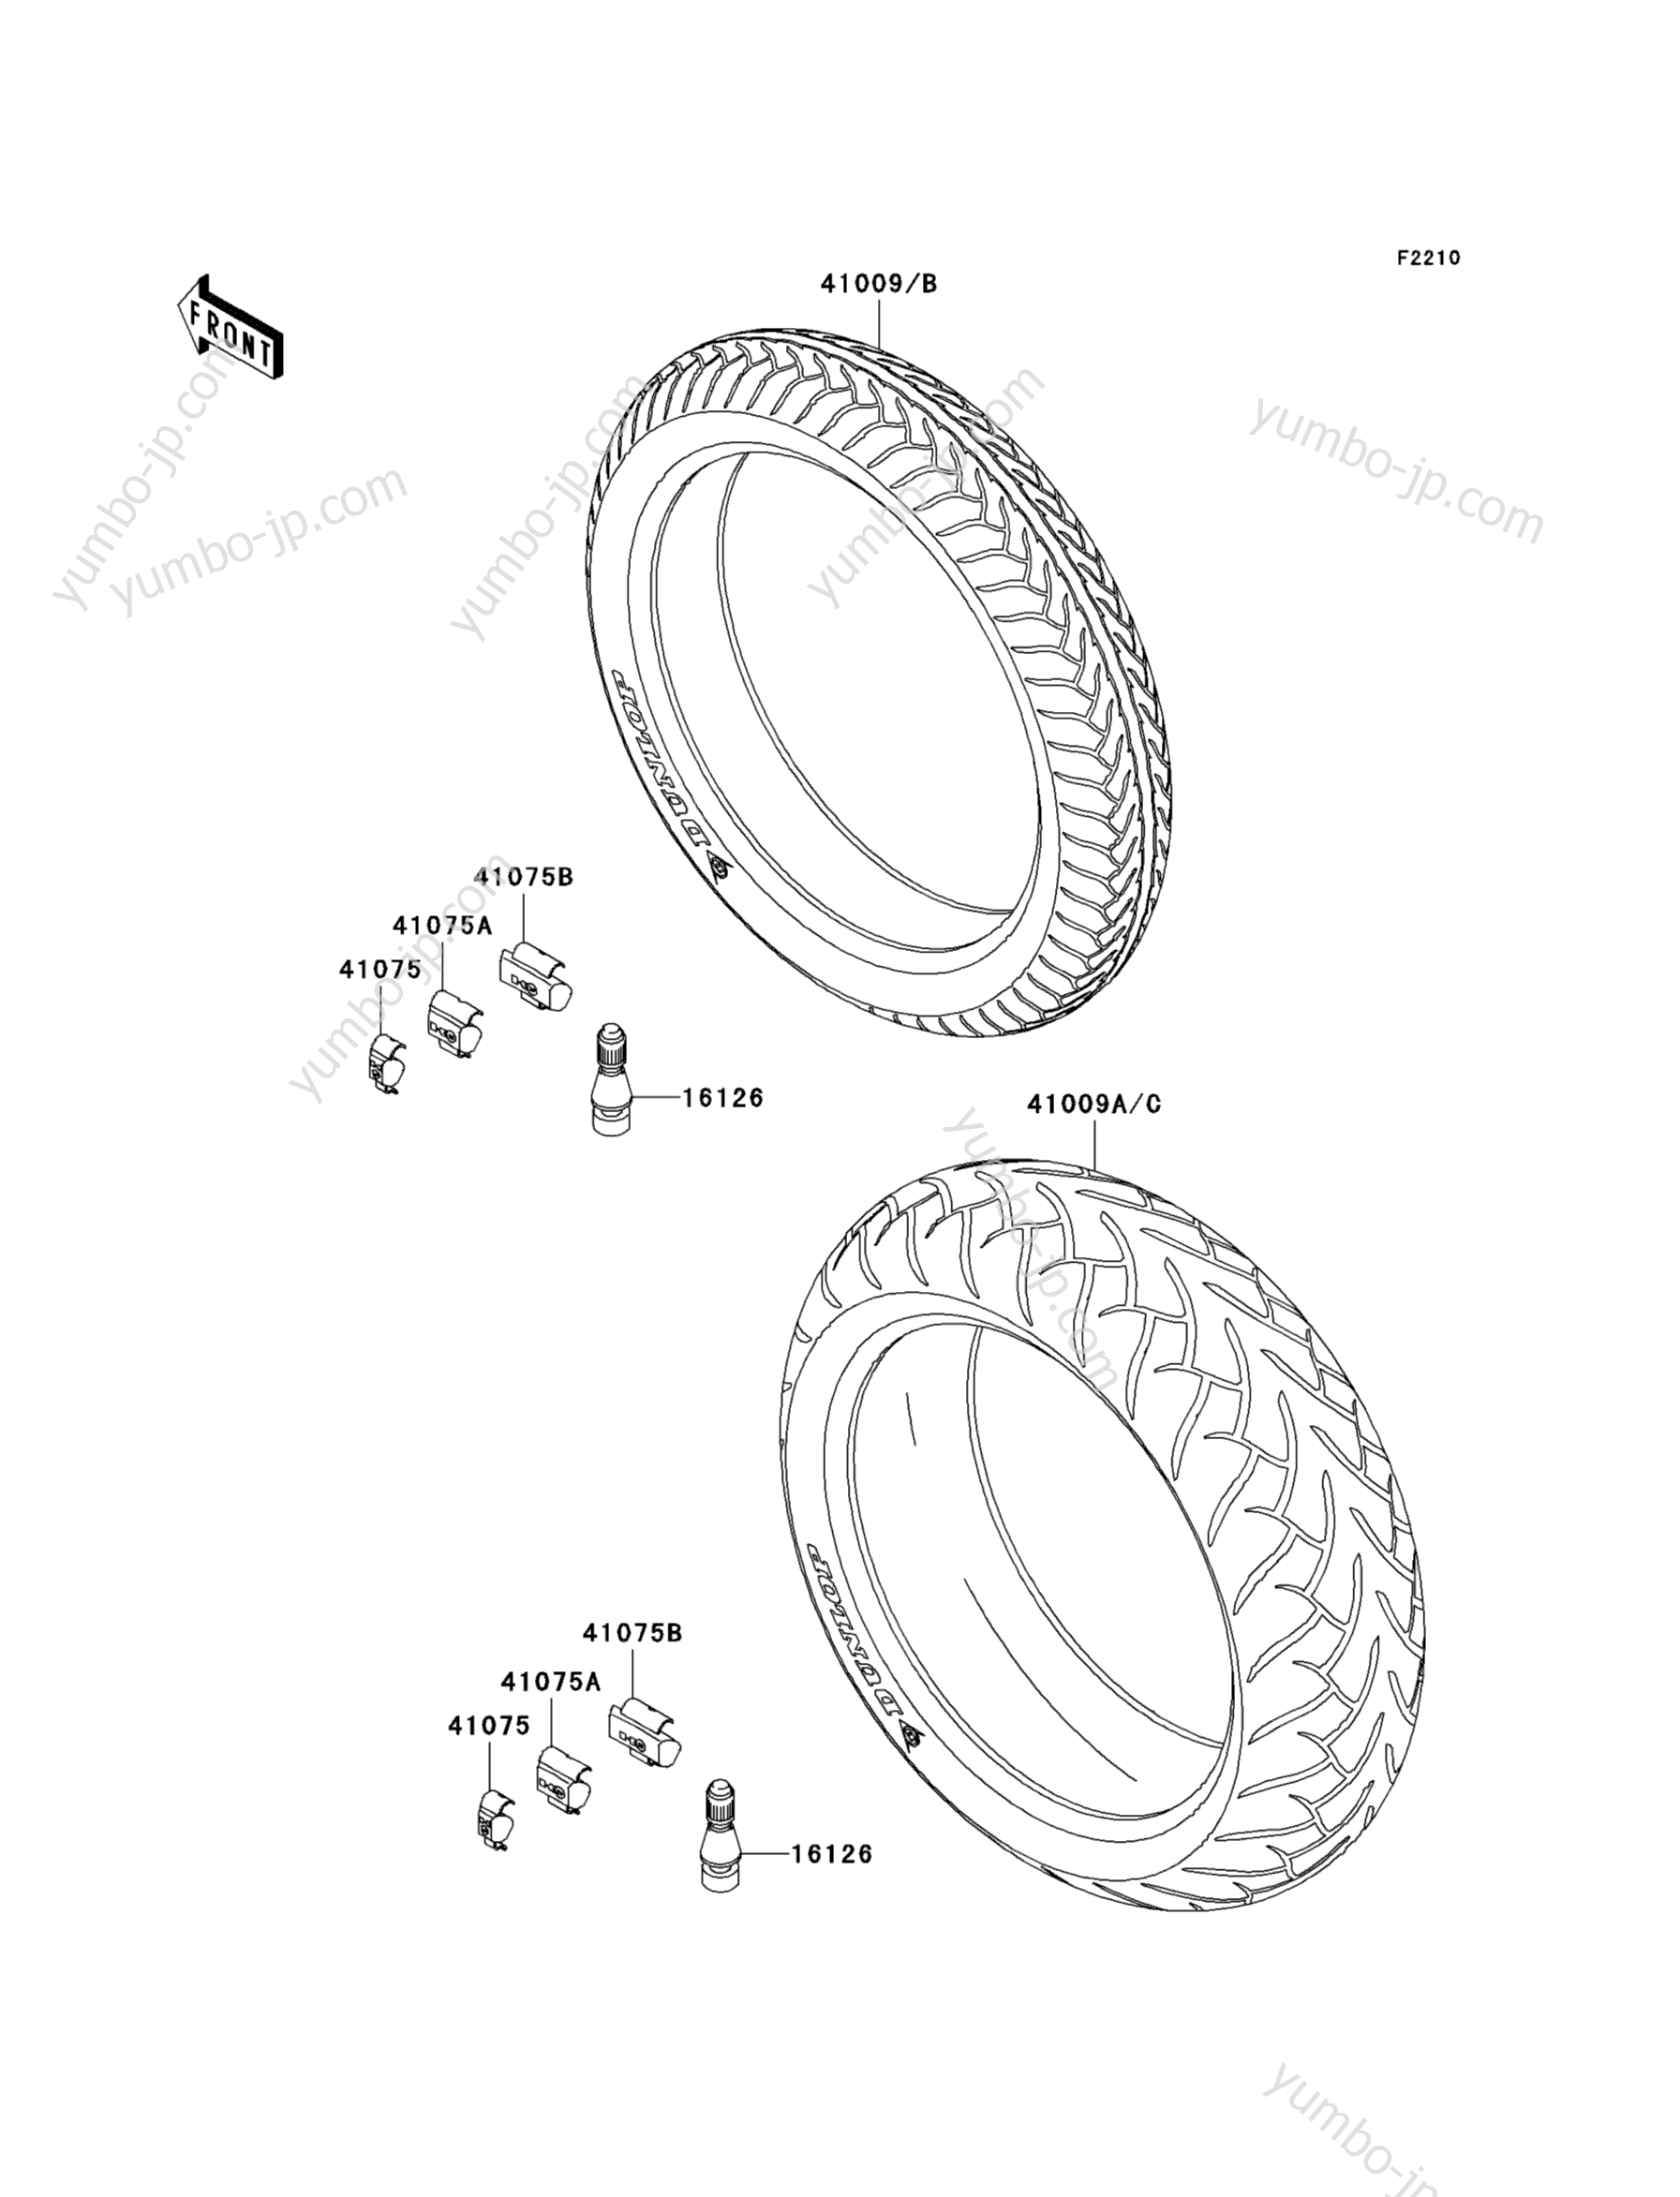 Tires for motorcycles KAWASAKI ZZR1200 (ZX1200-C4) 2005 year